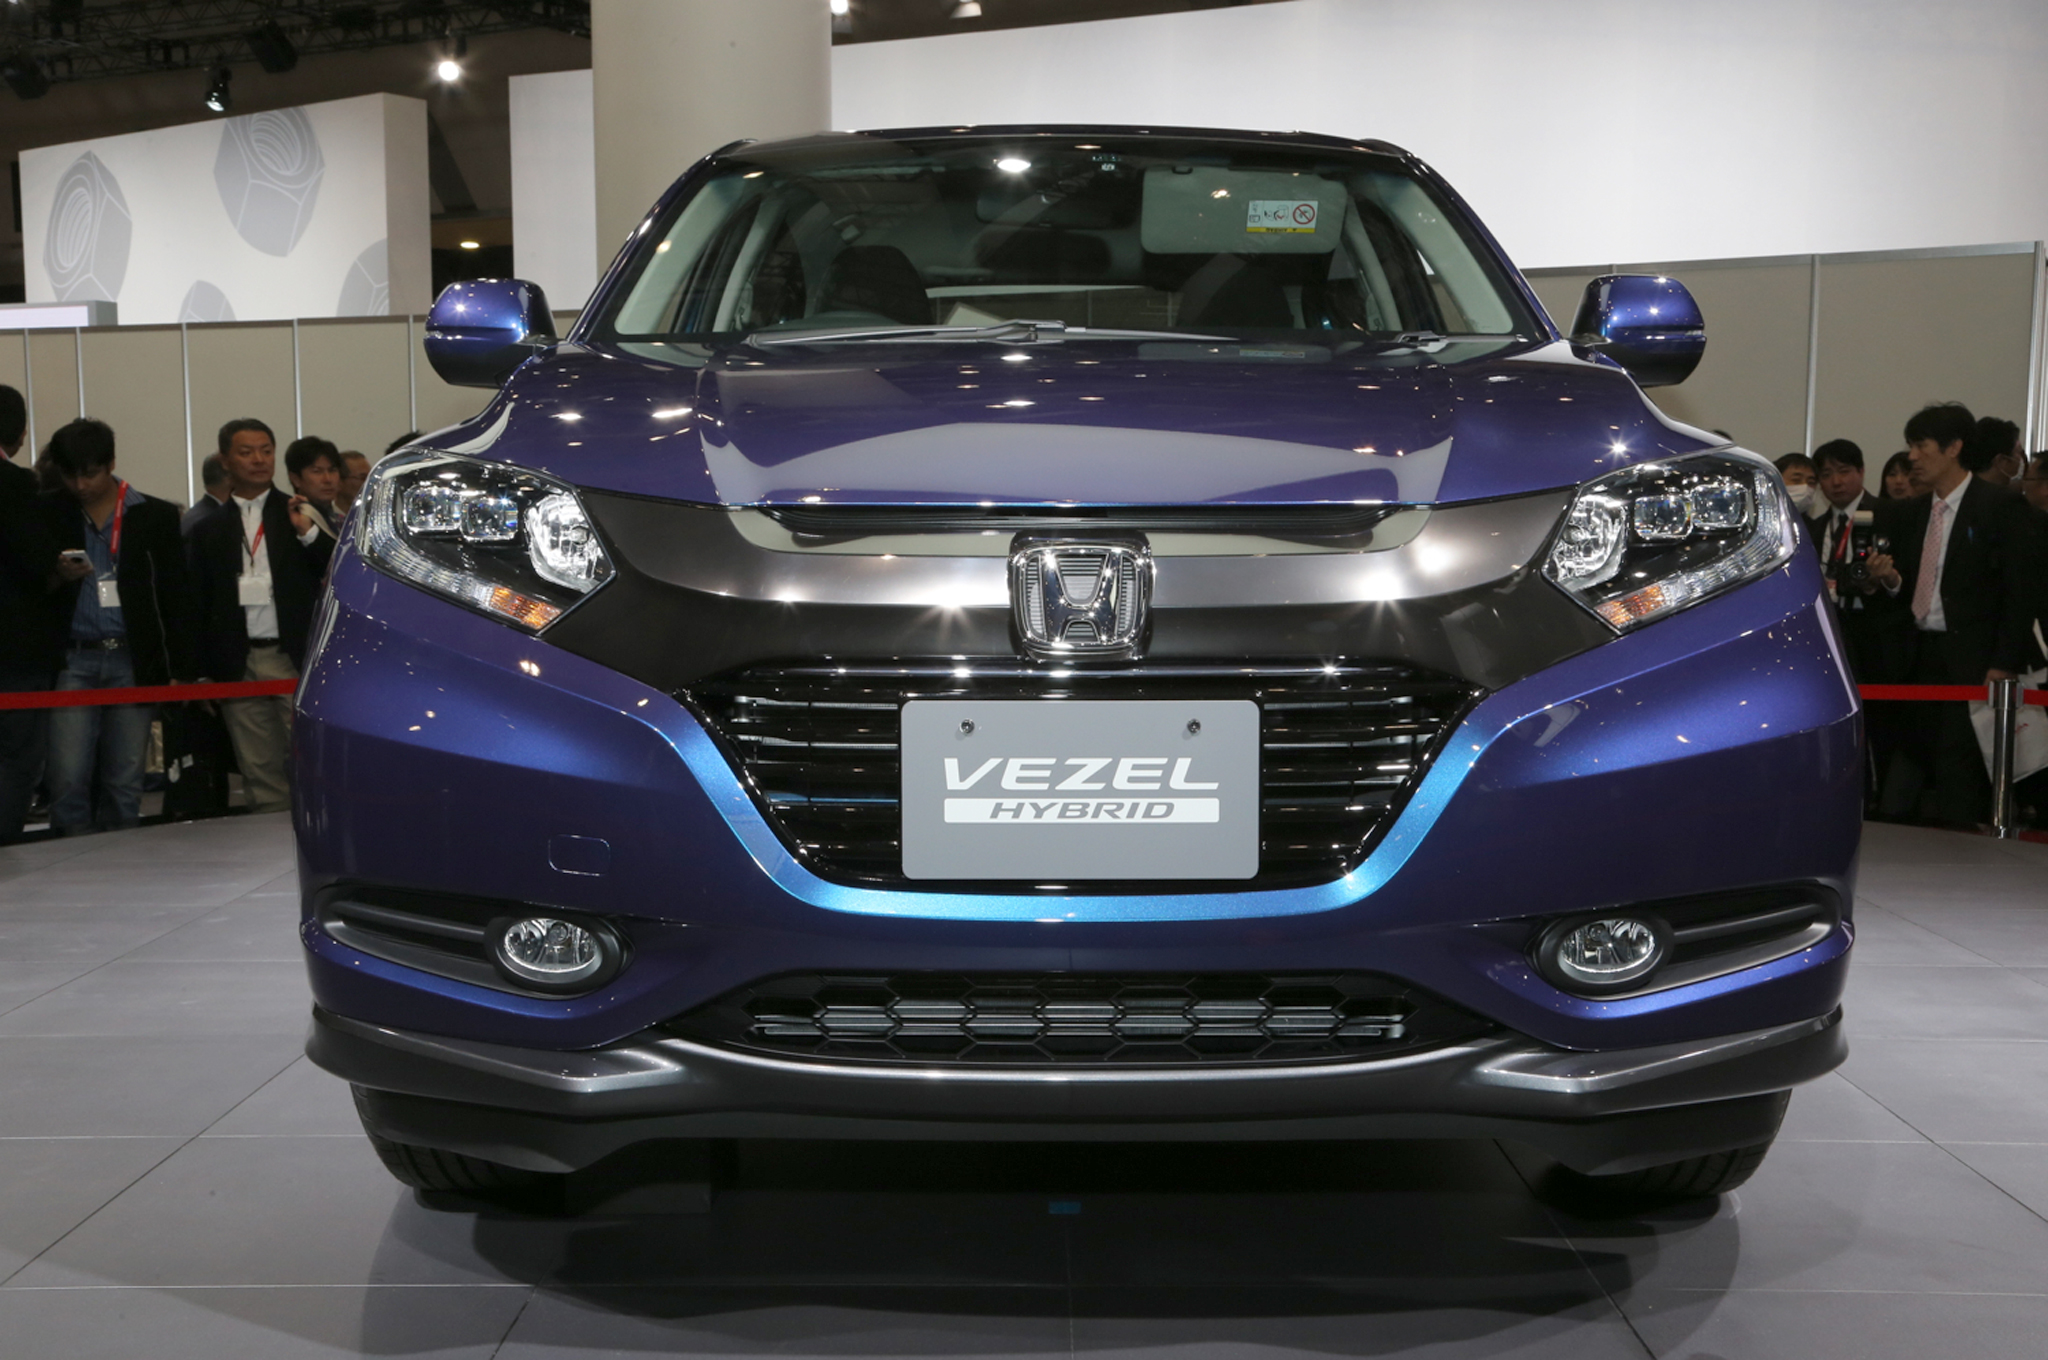 Honda Unveiled Urban SUV (The Vezel), coming to India by 2015